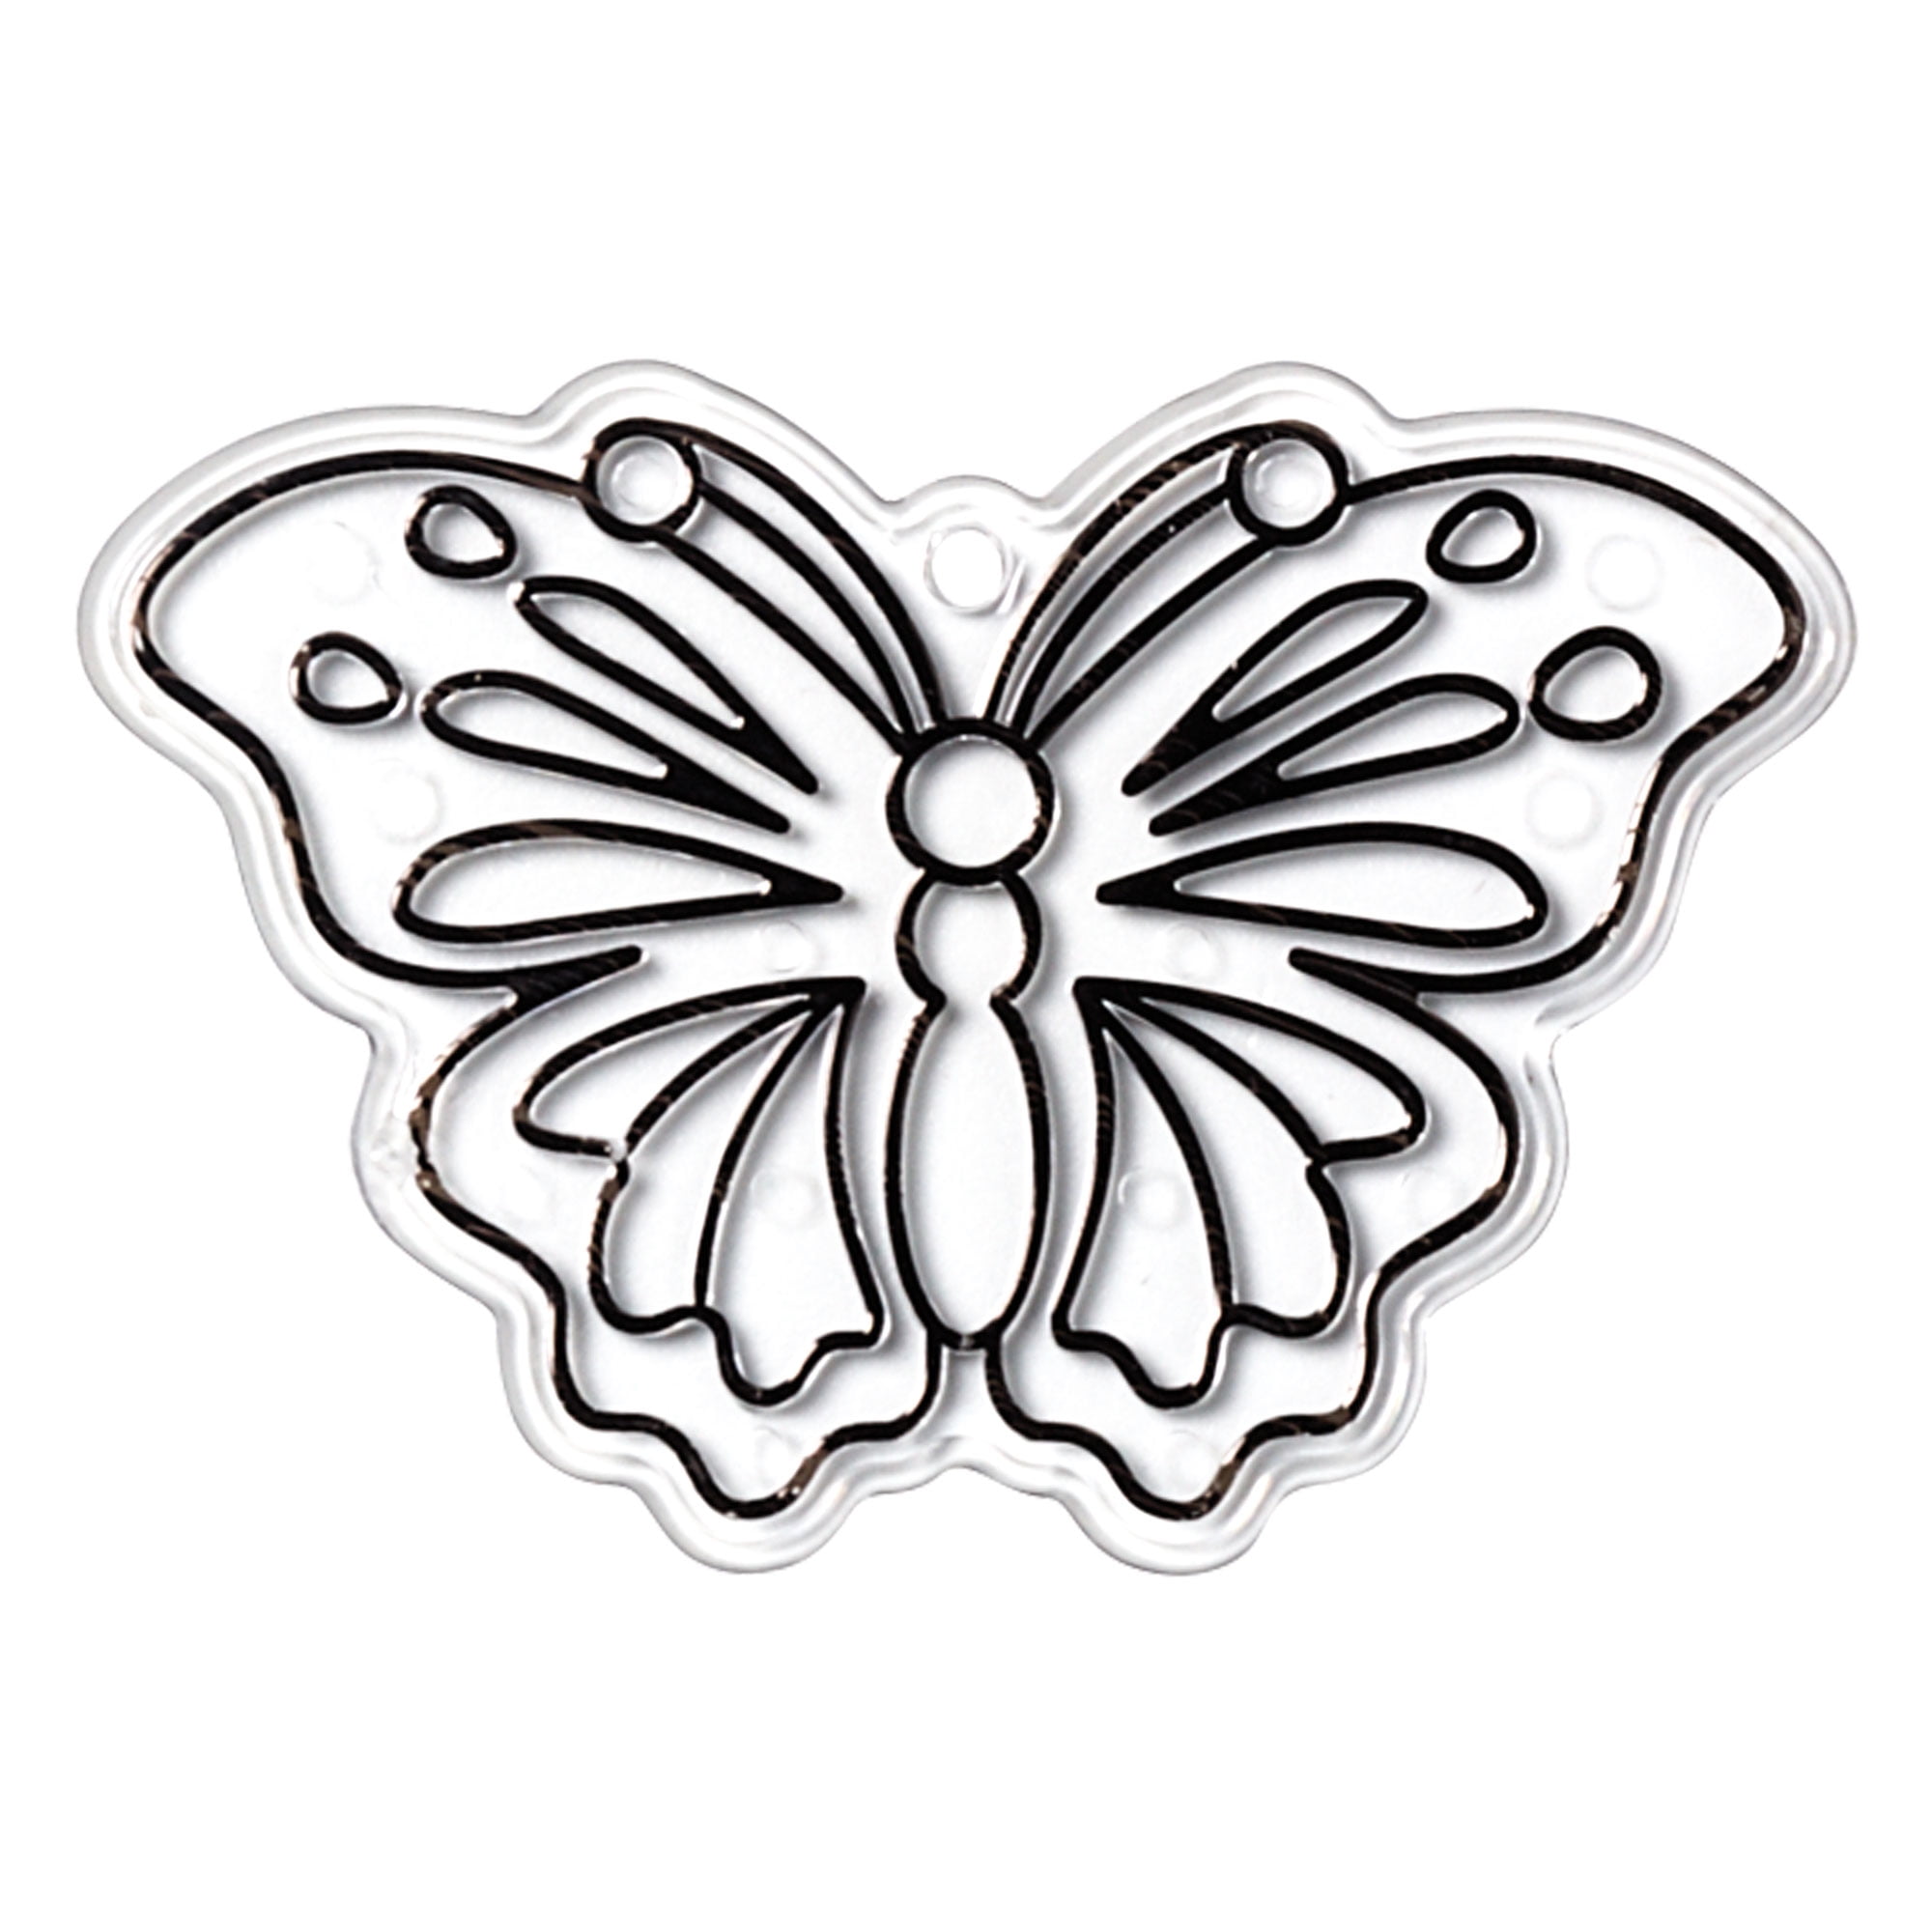 Hello Hobby Ready-to-Paint Butterfly Suncatcher, Plastic Suncatcher with Black Outlines, 4.5 in. x 3 in. x 0.15 in.